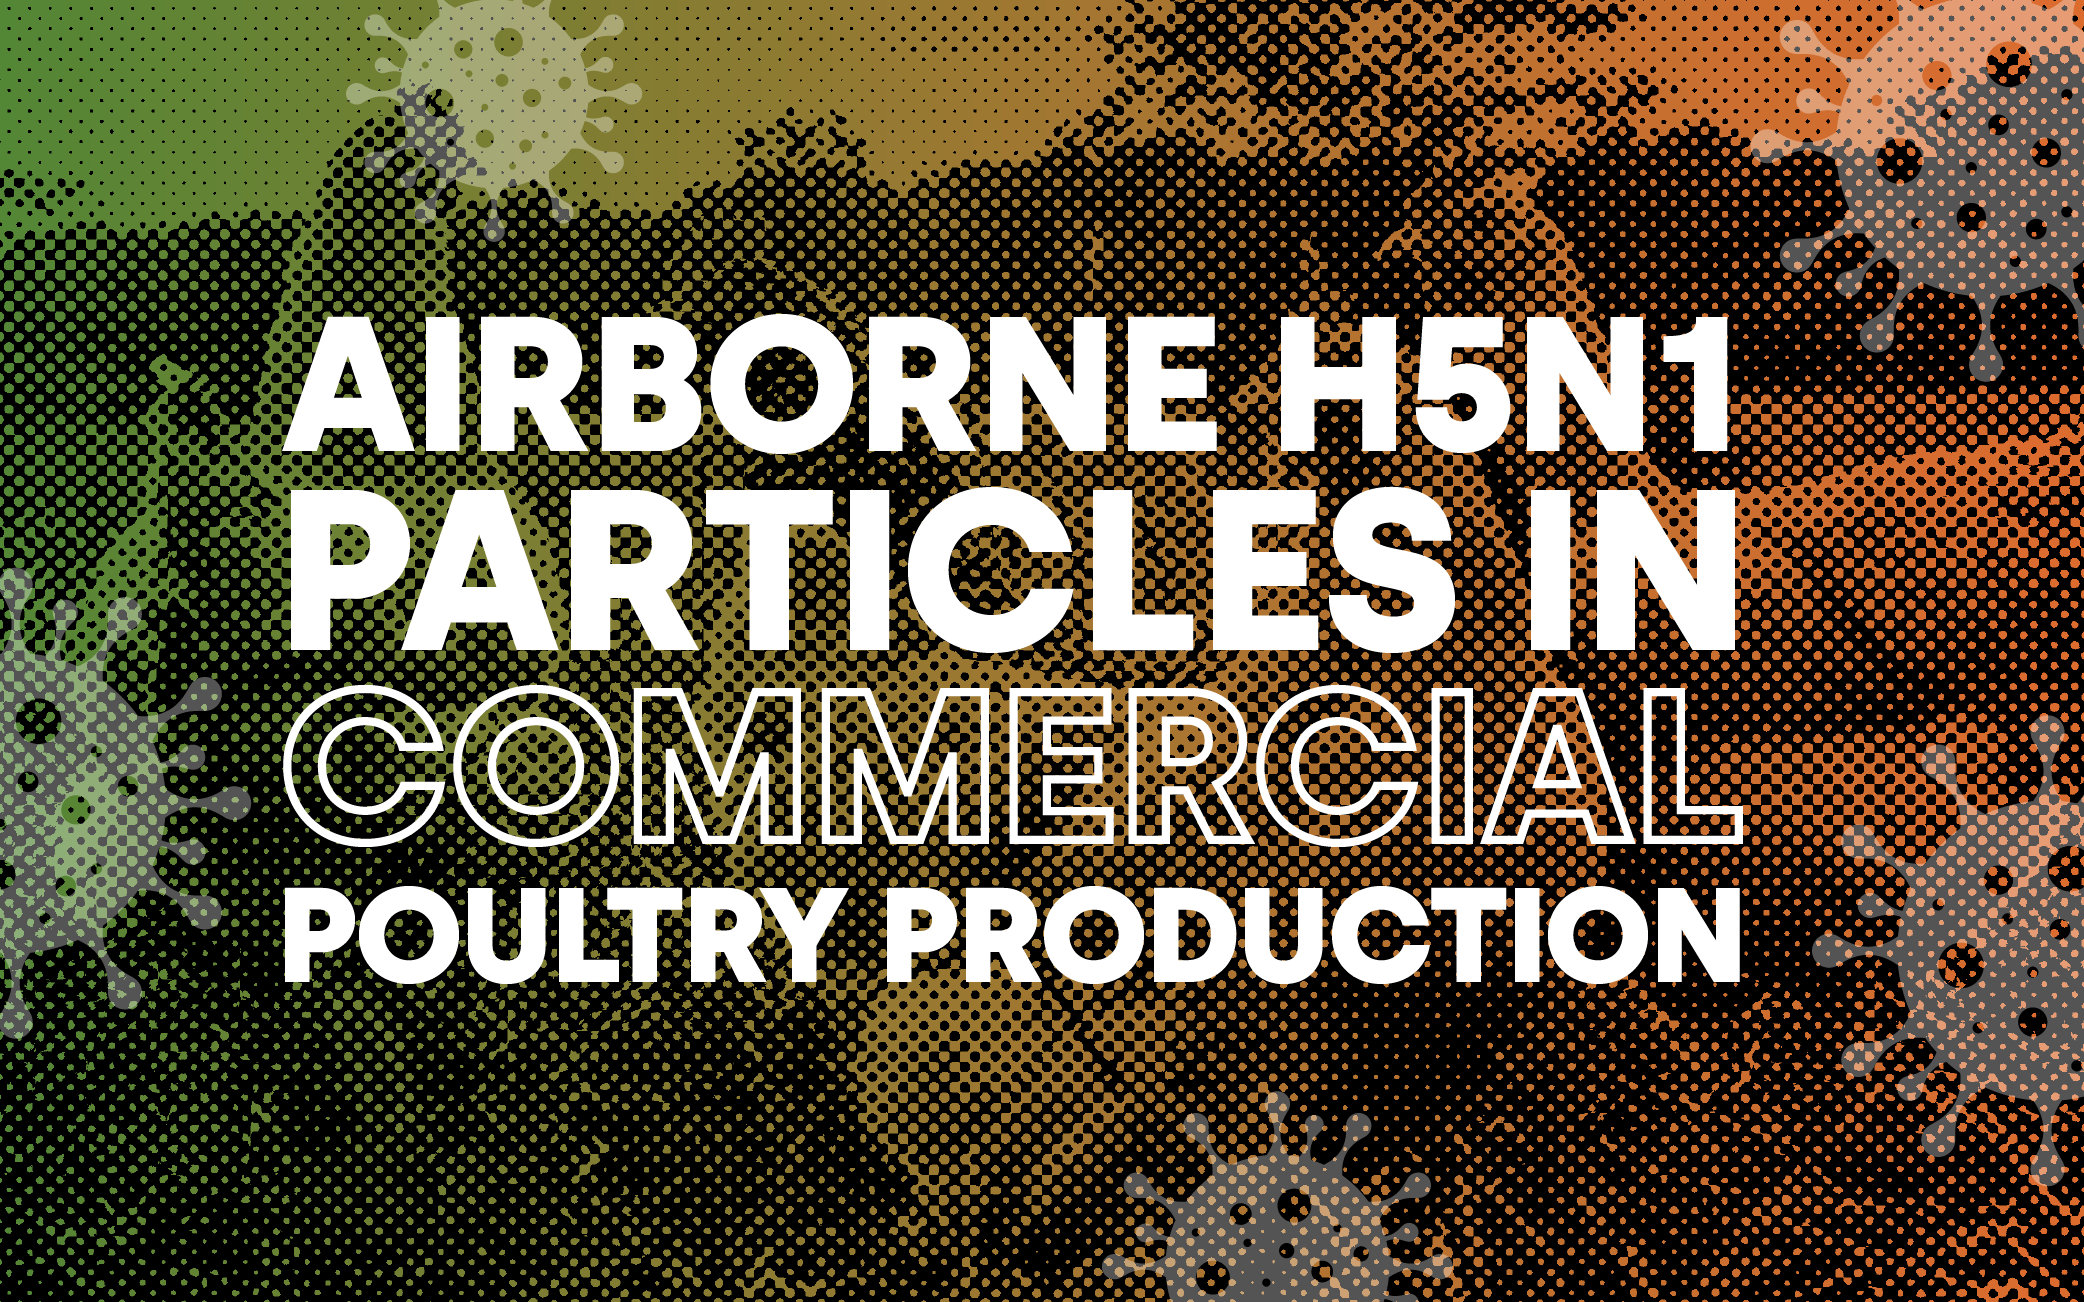 Airborne H5N1 Particles in Commercial Poultry Production